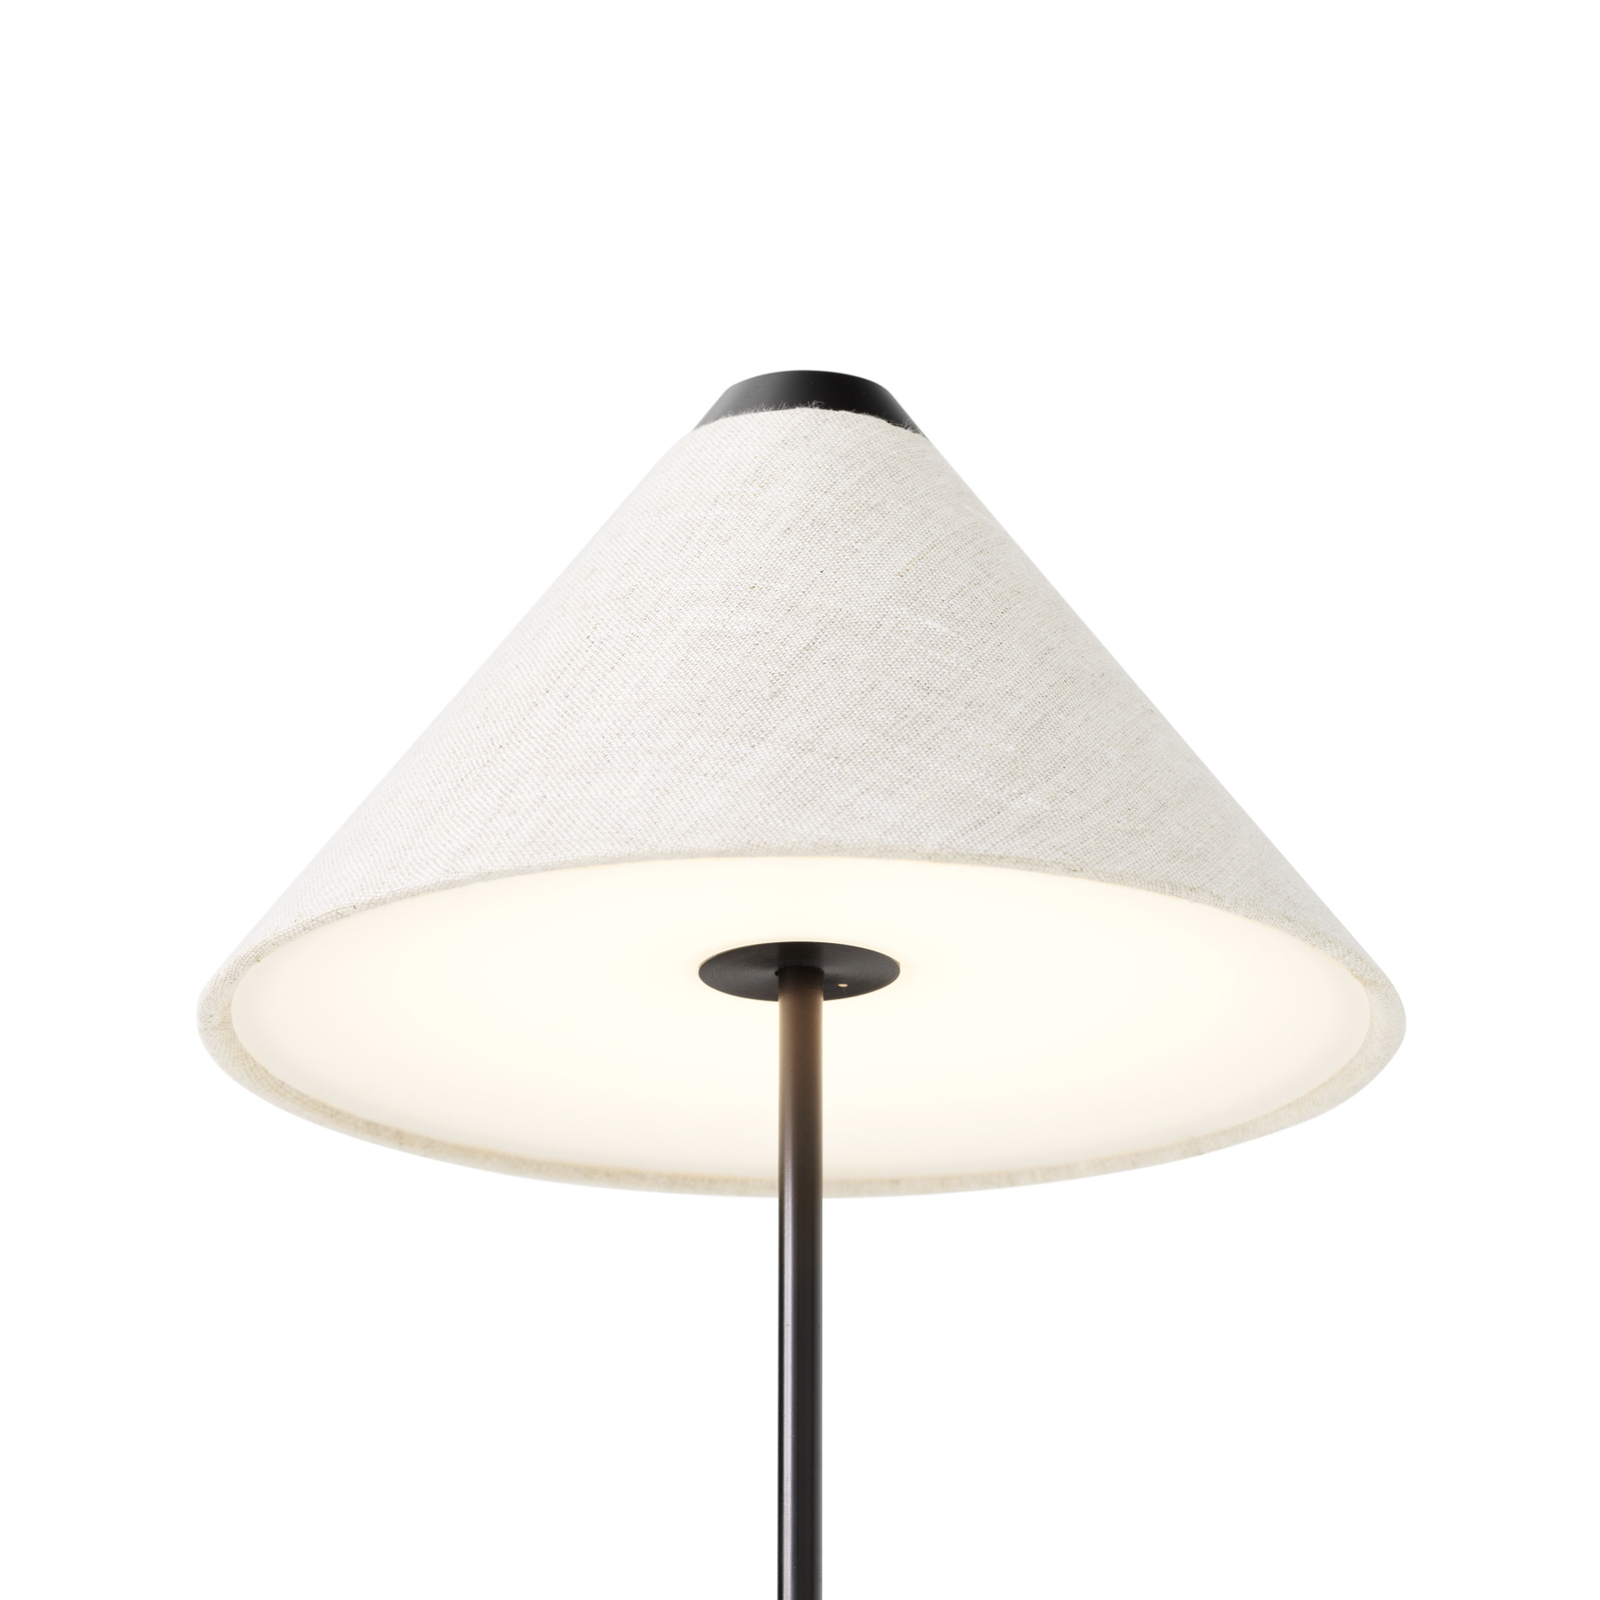 New Works Brolly lampe à poser batterie IP44 blanc